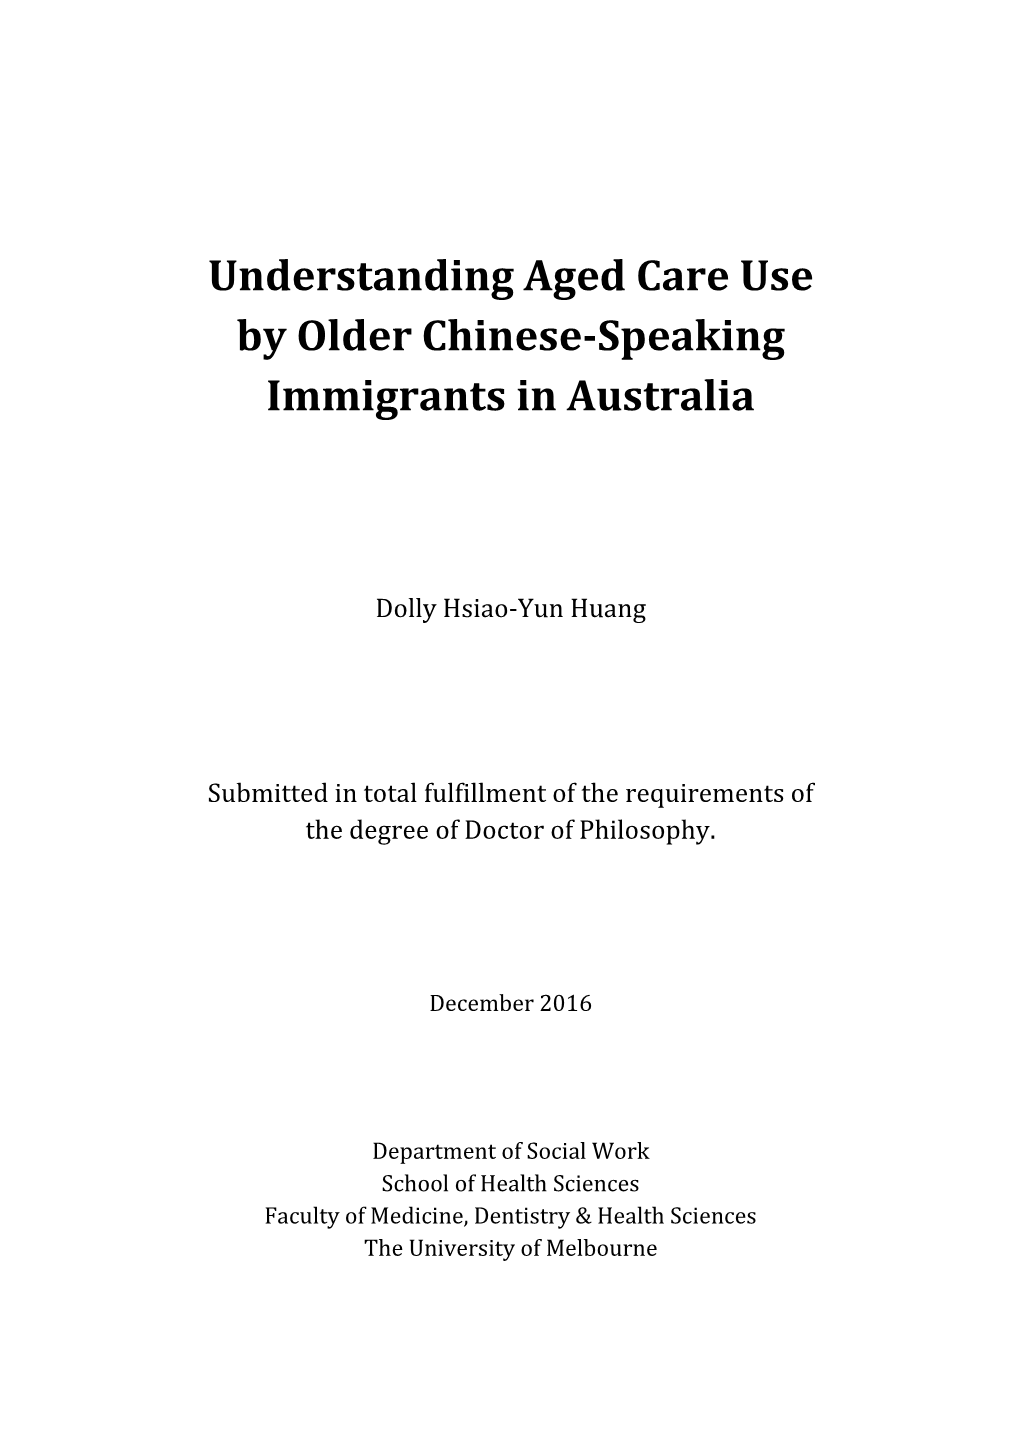 Understanding Aged Care Use by Older Chinese-Speaking Immigrants in Australia